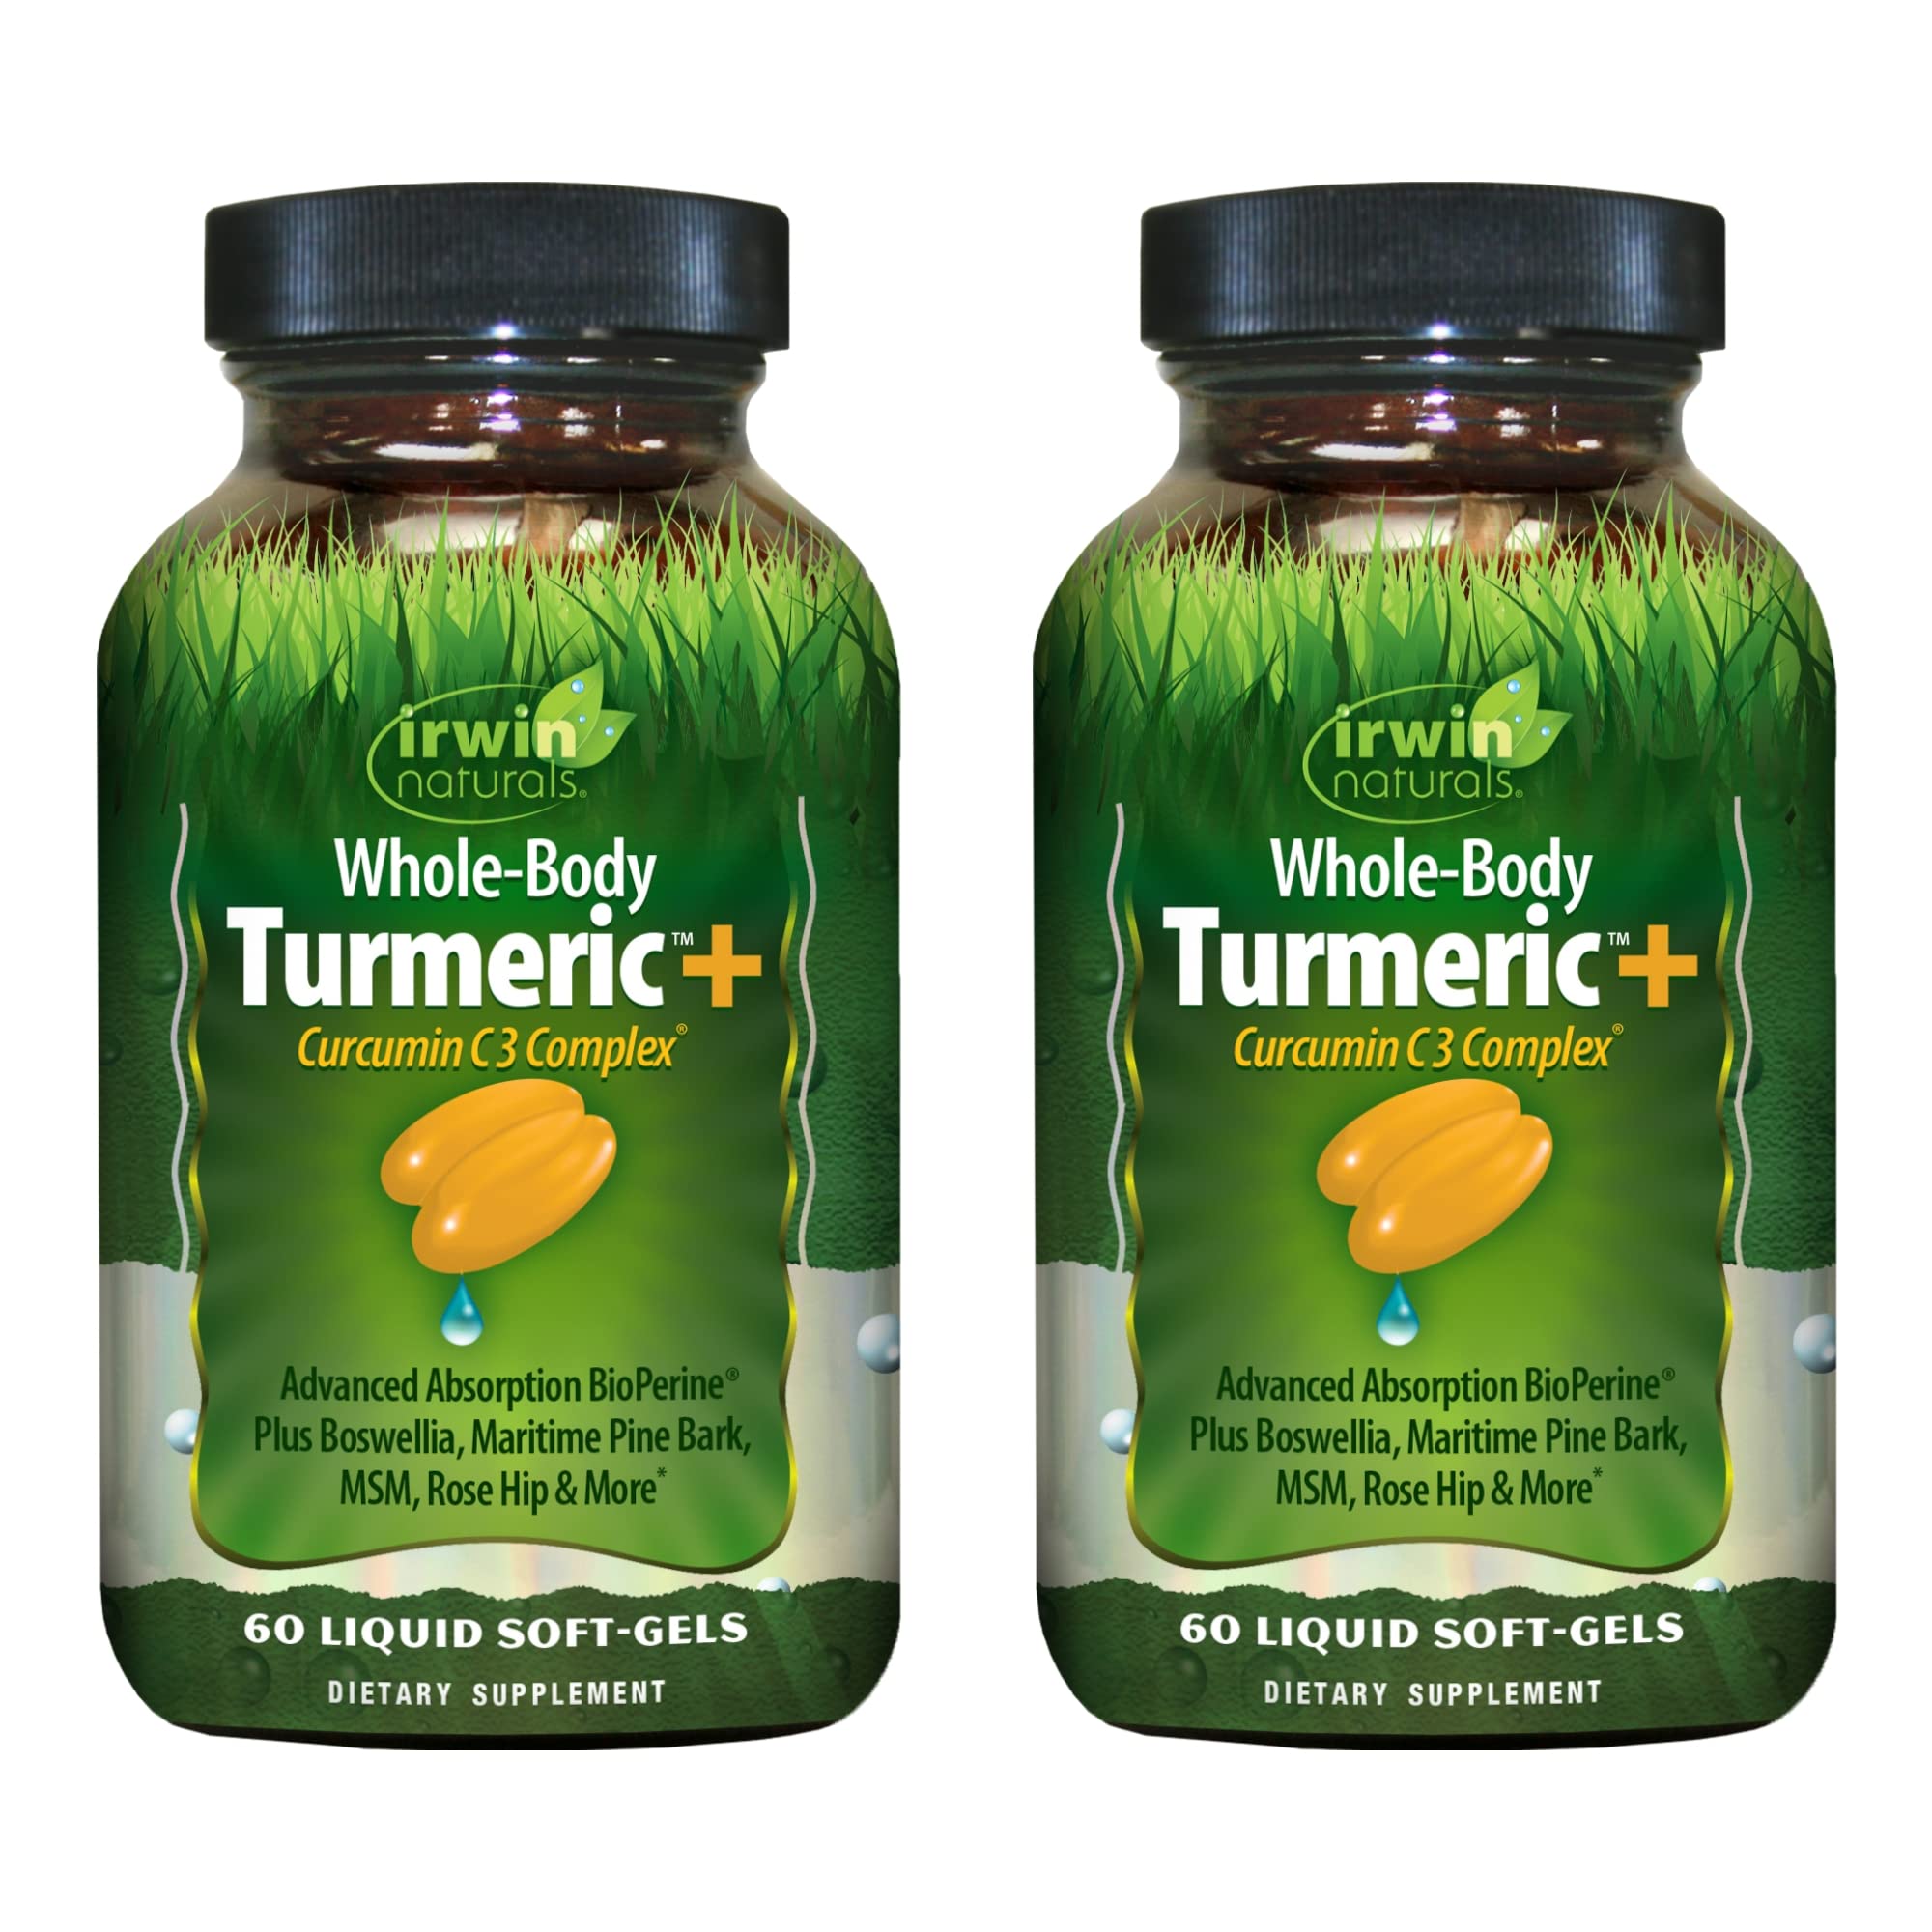 Irwin Naturals Whole Body Turmeric + Curcumin C3 Complex - 60 Liquid Soft-Gels, Pack of 2 - Supports Whole-Body Wellness - 60 Total Servings